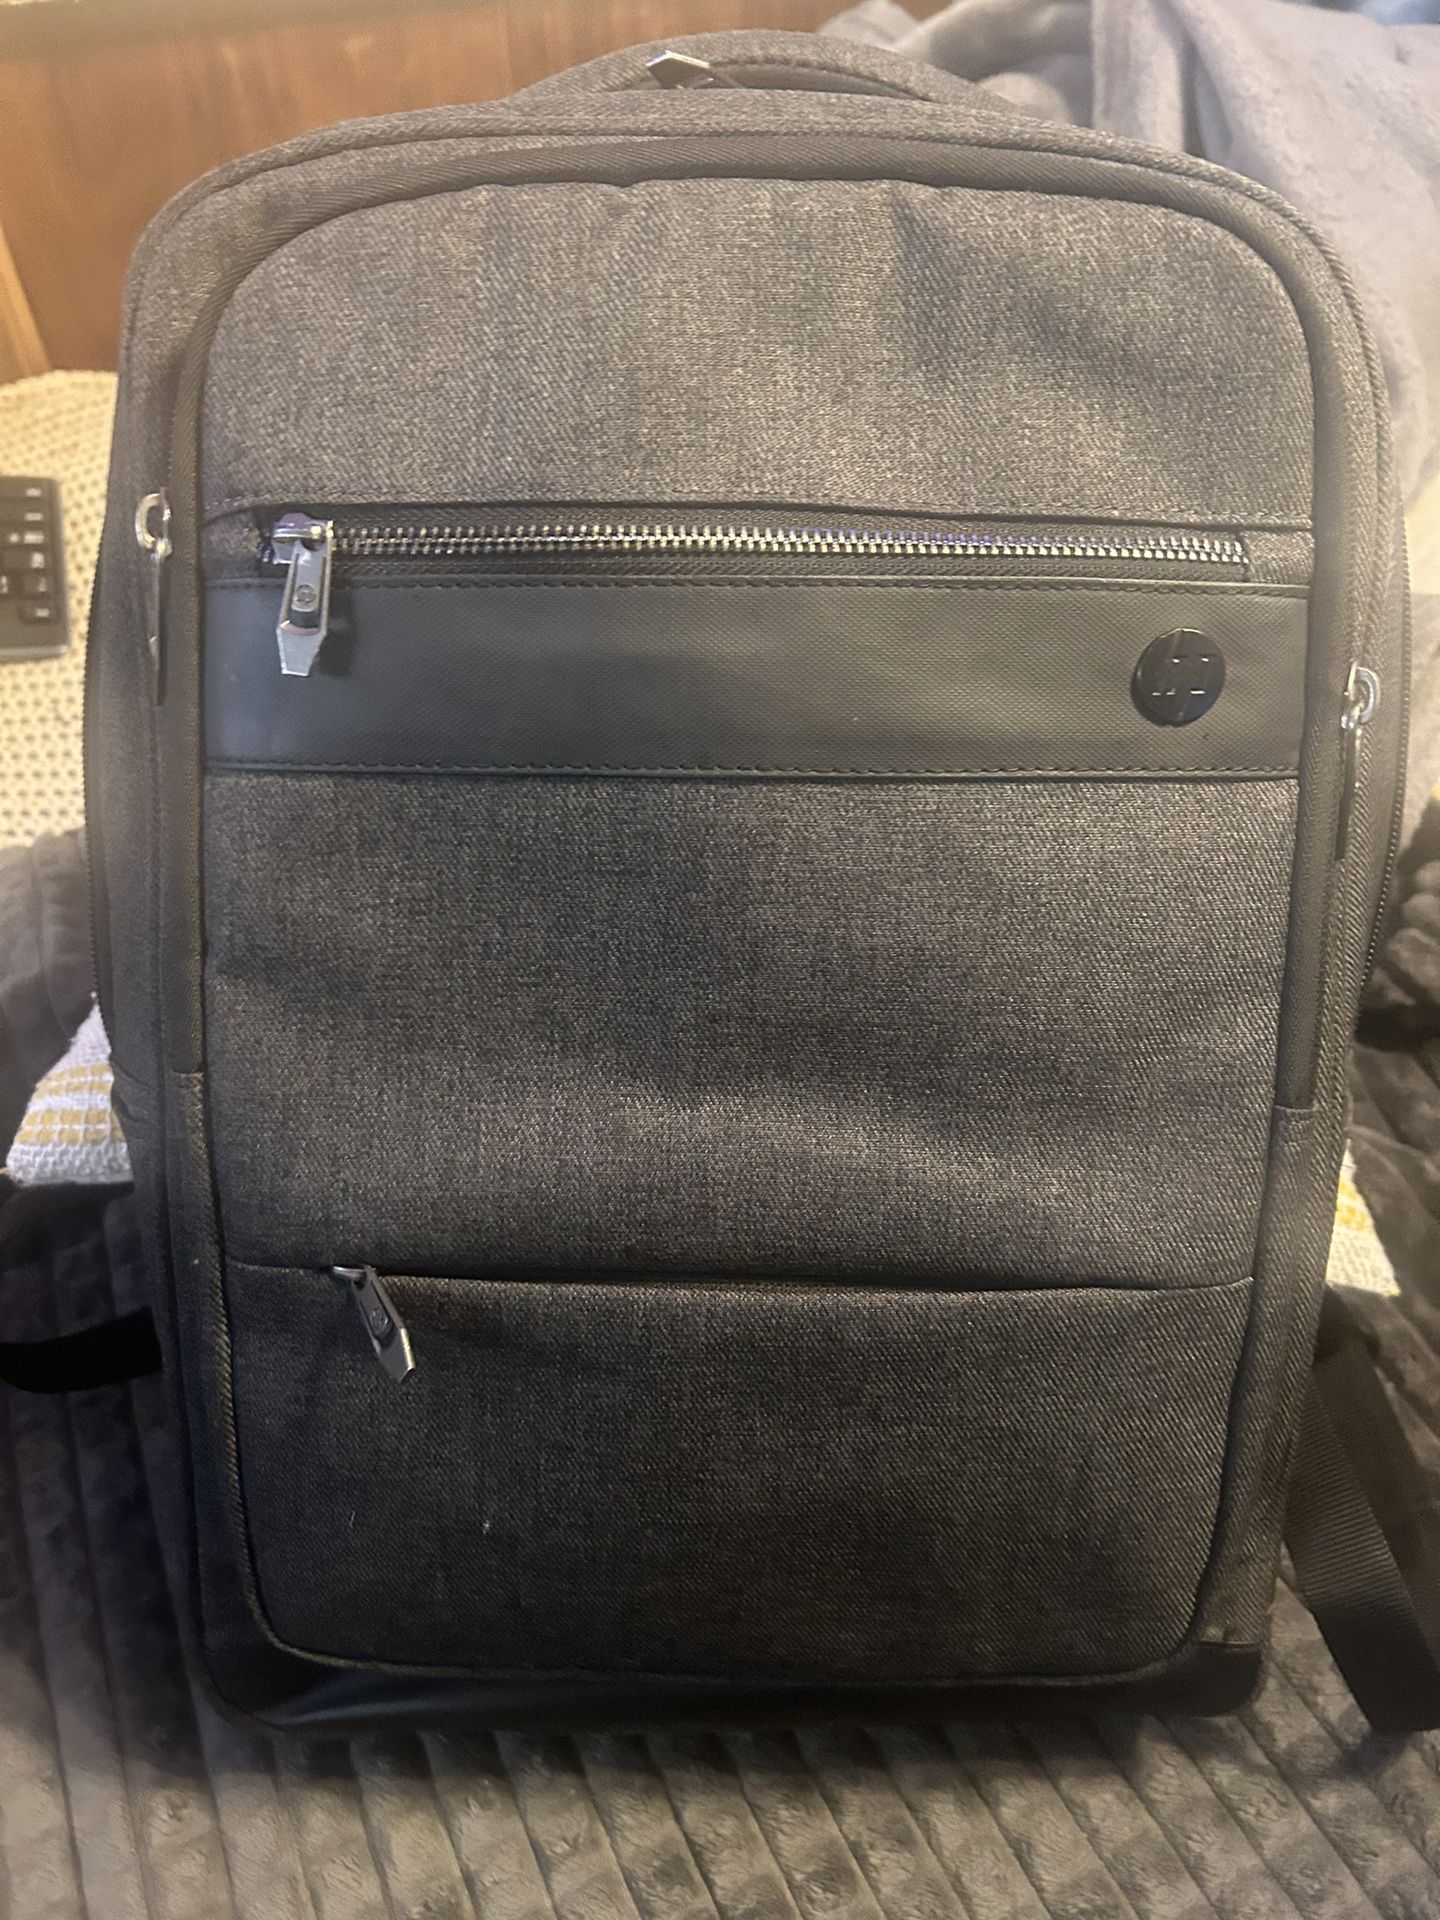 HP Executive 👨‍💼 Laptop Back Pack W/ Exterior To Interior USB Plug ( Price Reduced 15$)